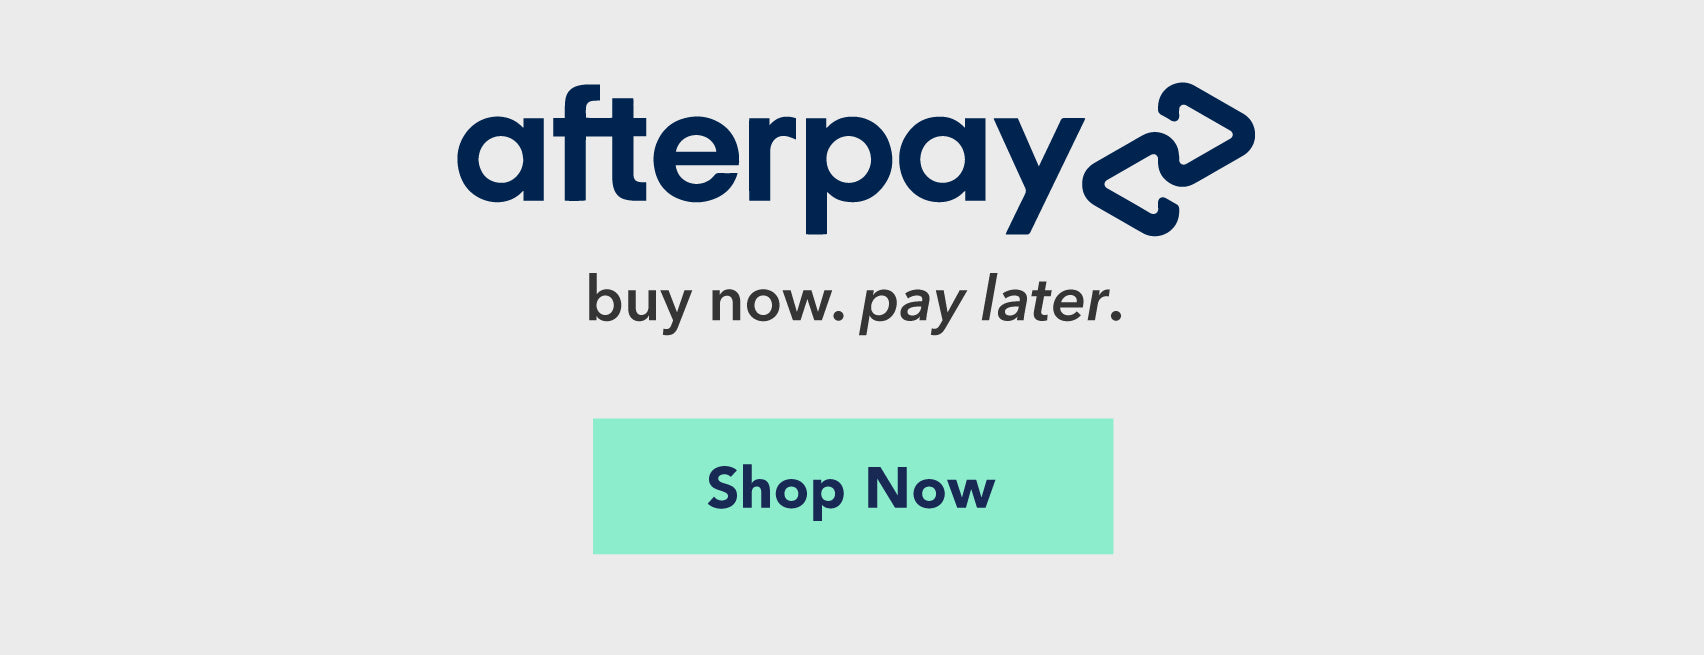 Shop our Products with Afterpay - Buy Now, Pay Later